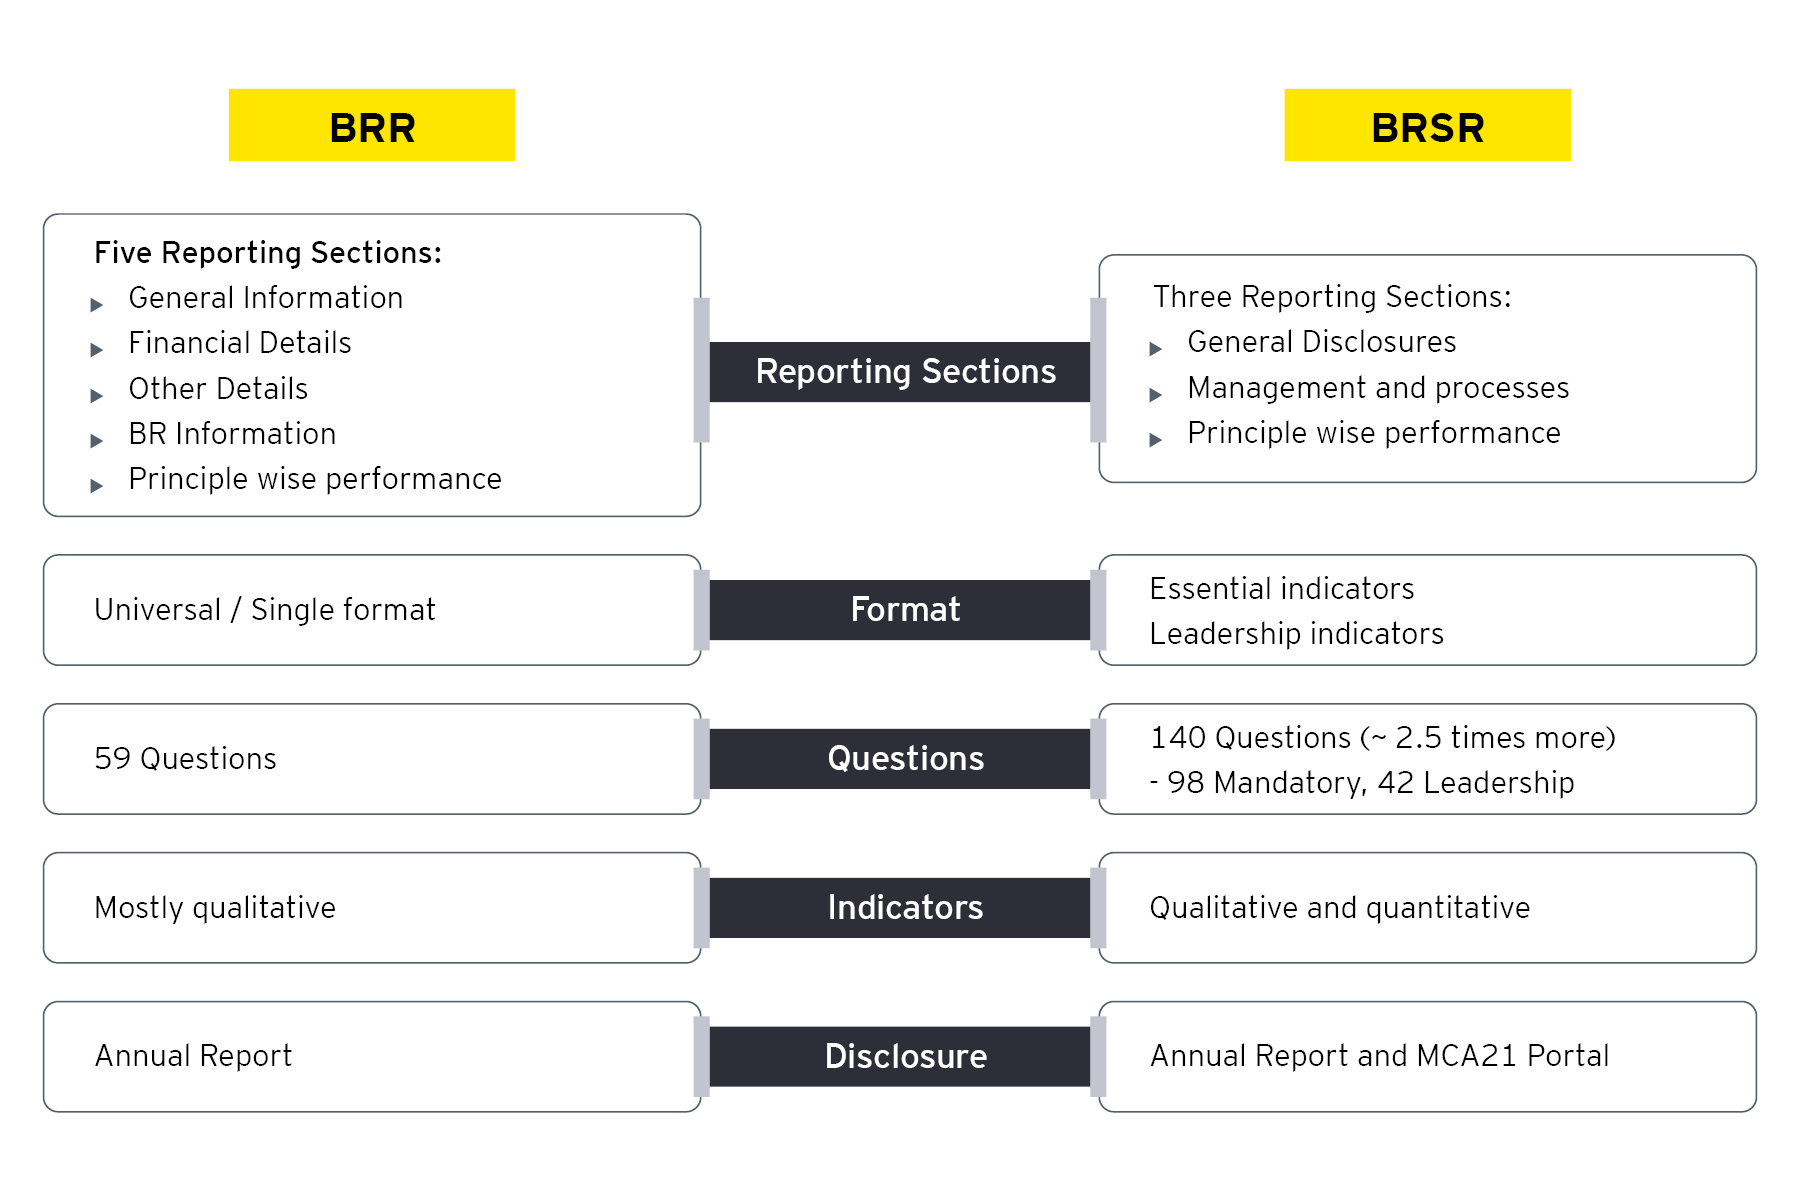 The key differences between BRSR and BRR